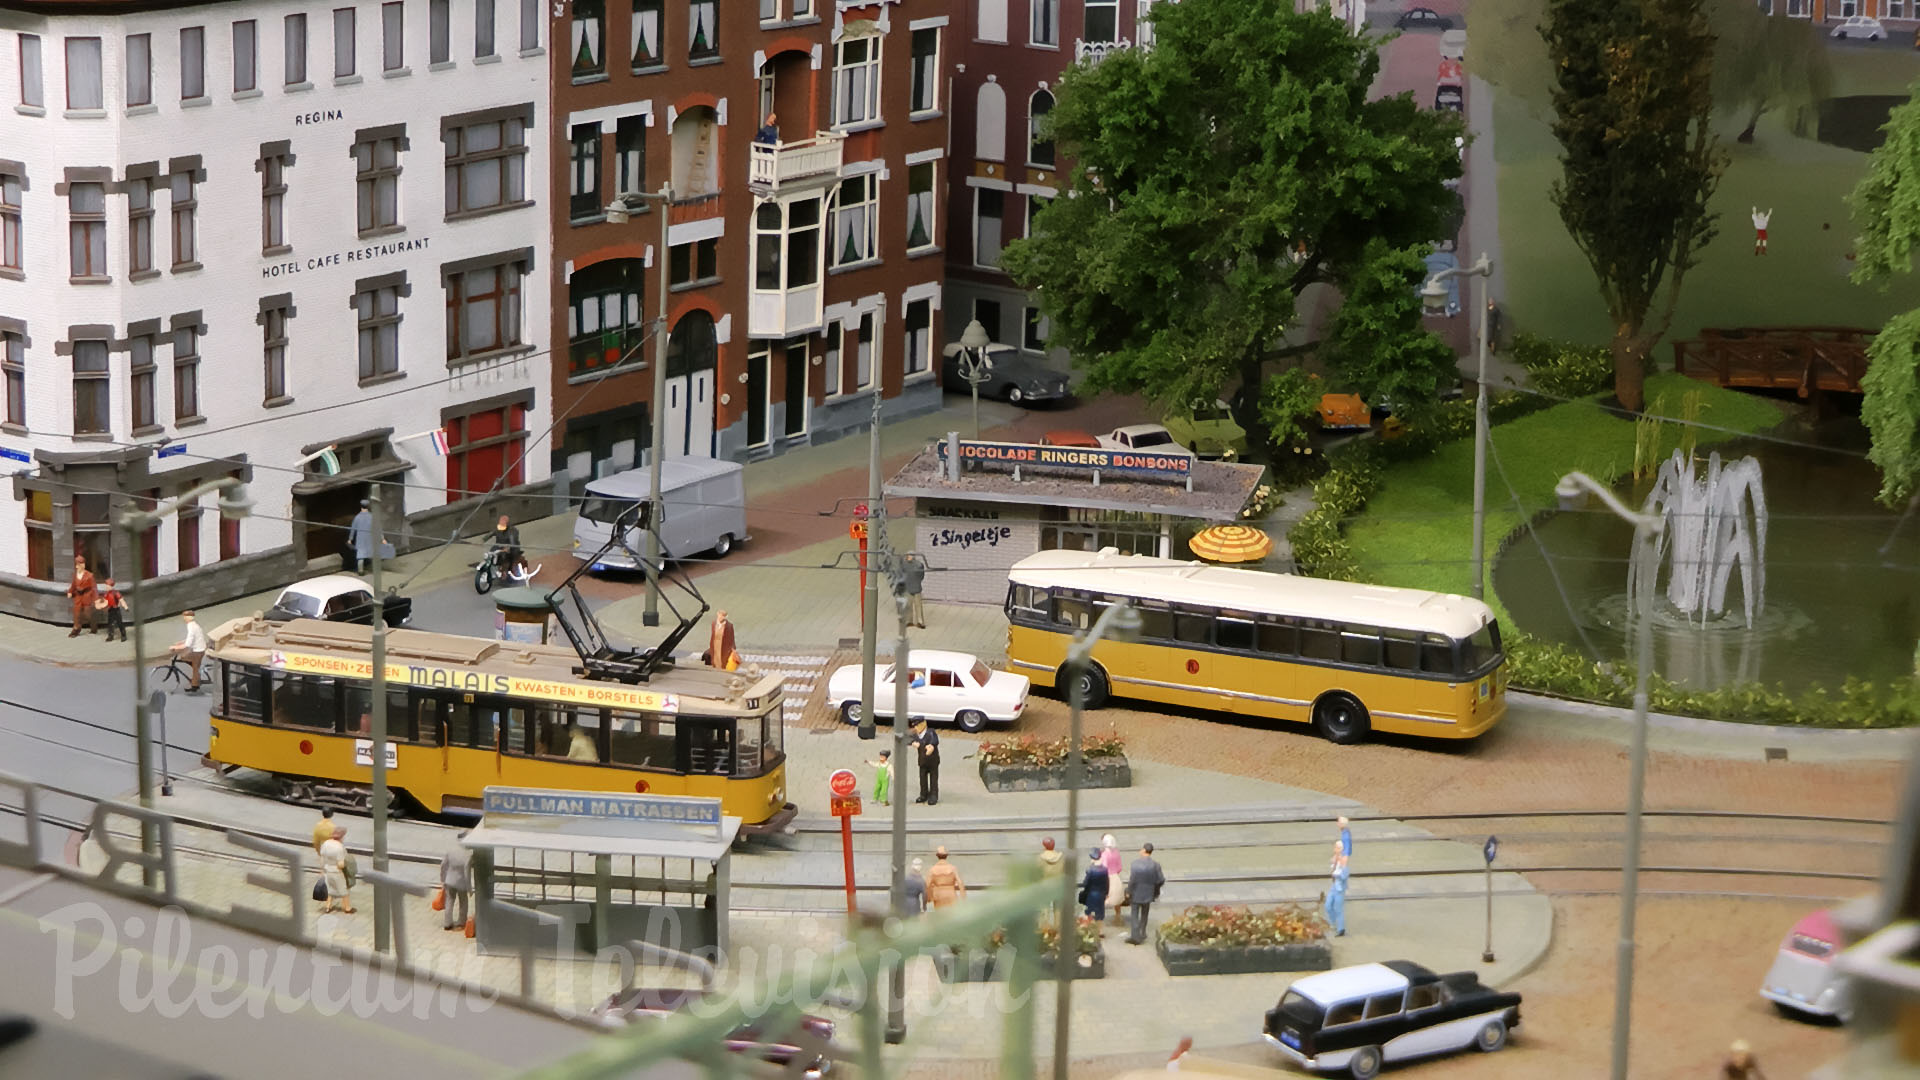 Rotterdam Centraal Railway Station - Model Rail Layout with Trams and Trains in HO Scale by Thom Raven